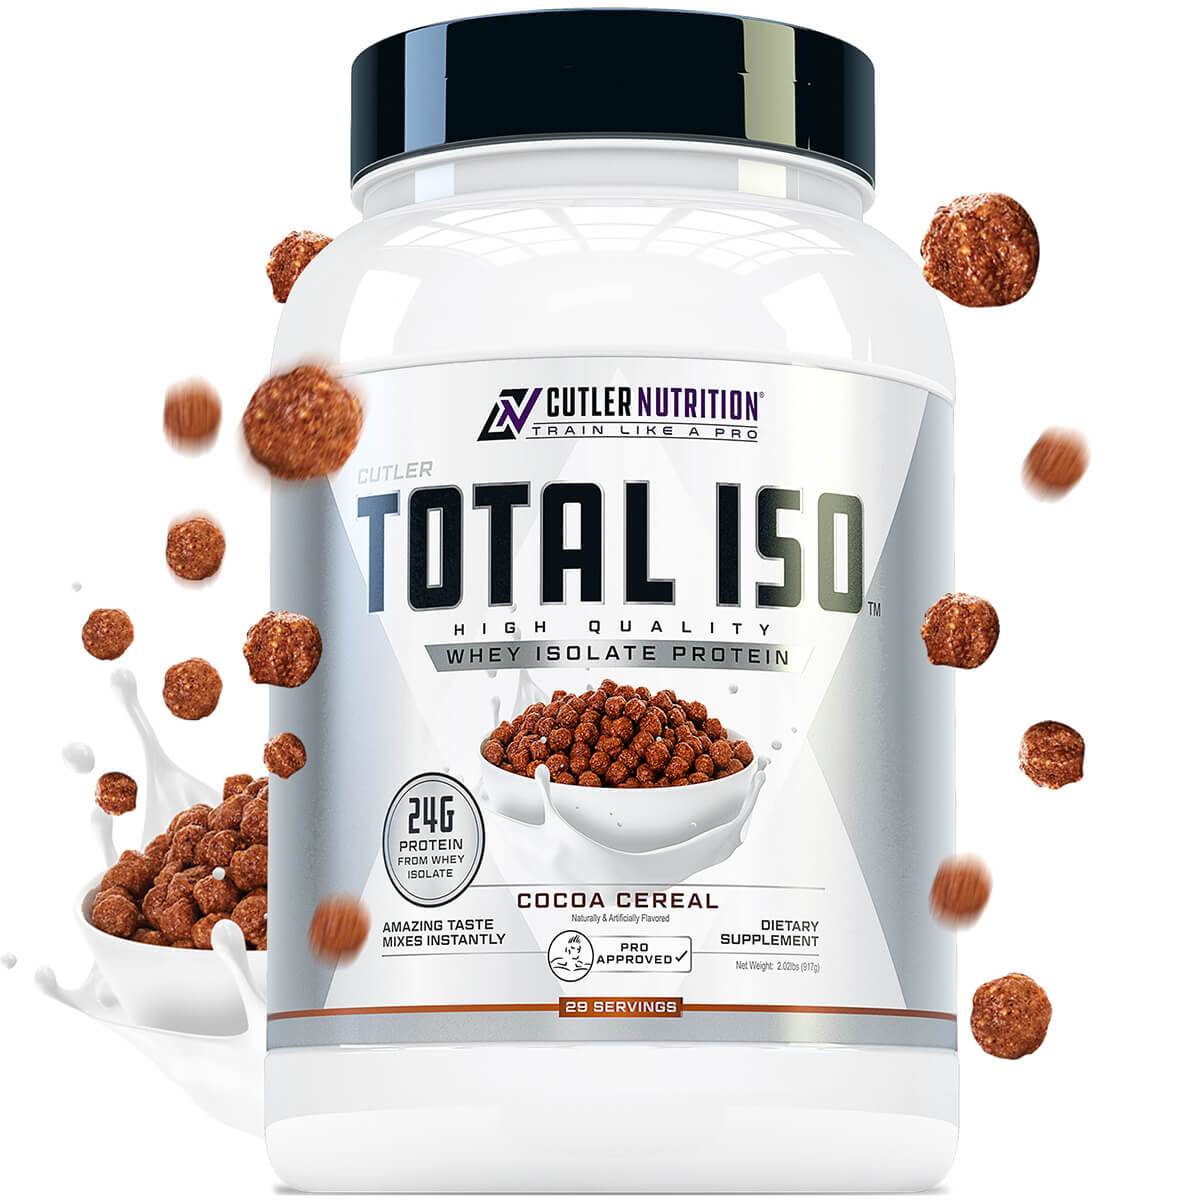 Cutler Nutrition -  Total ISO